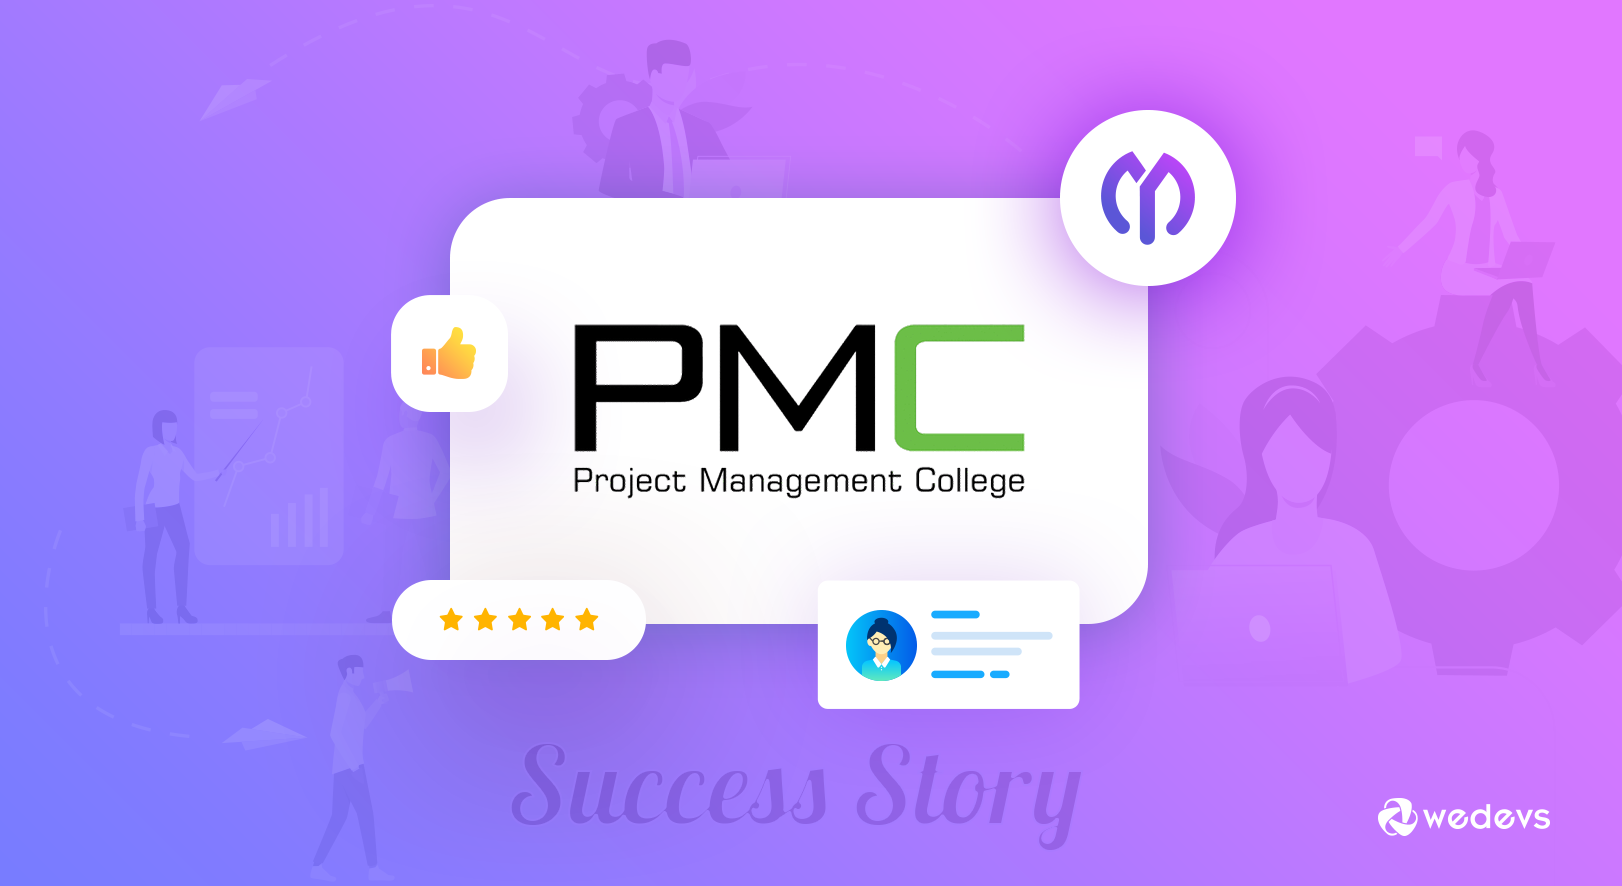 Aspiring Success Story of an Educational Institute &#8216;Project Management College&#8217;